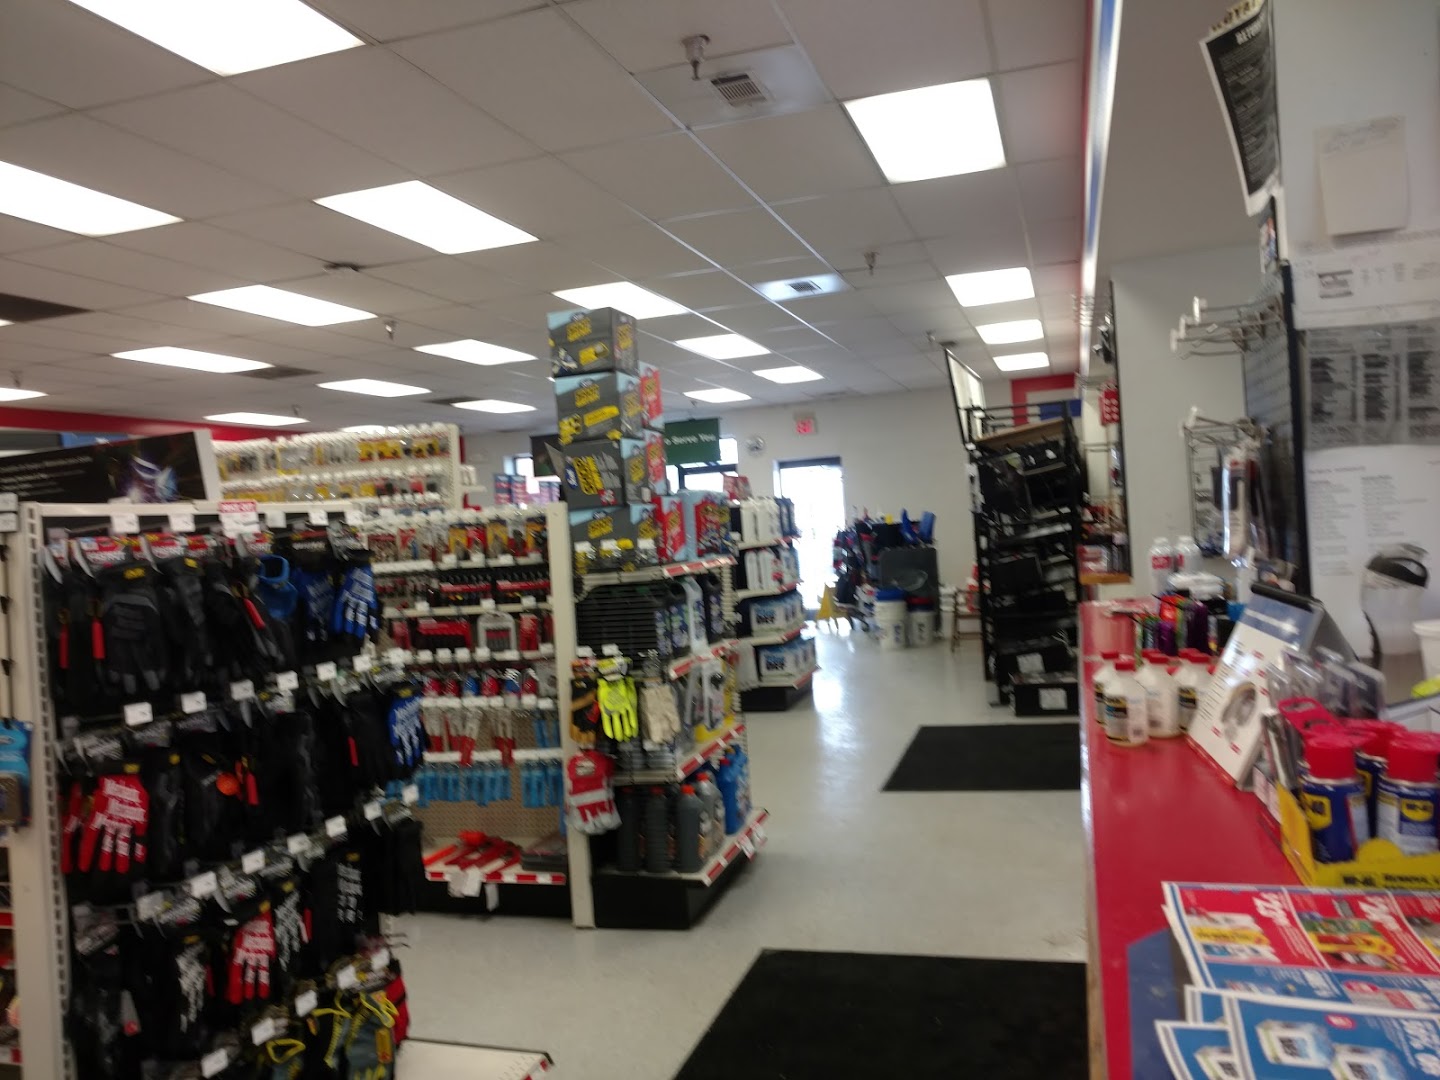 Auto parts store In Billings MT 